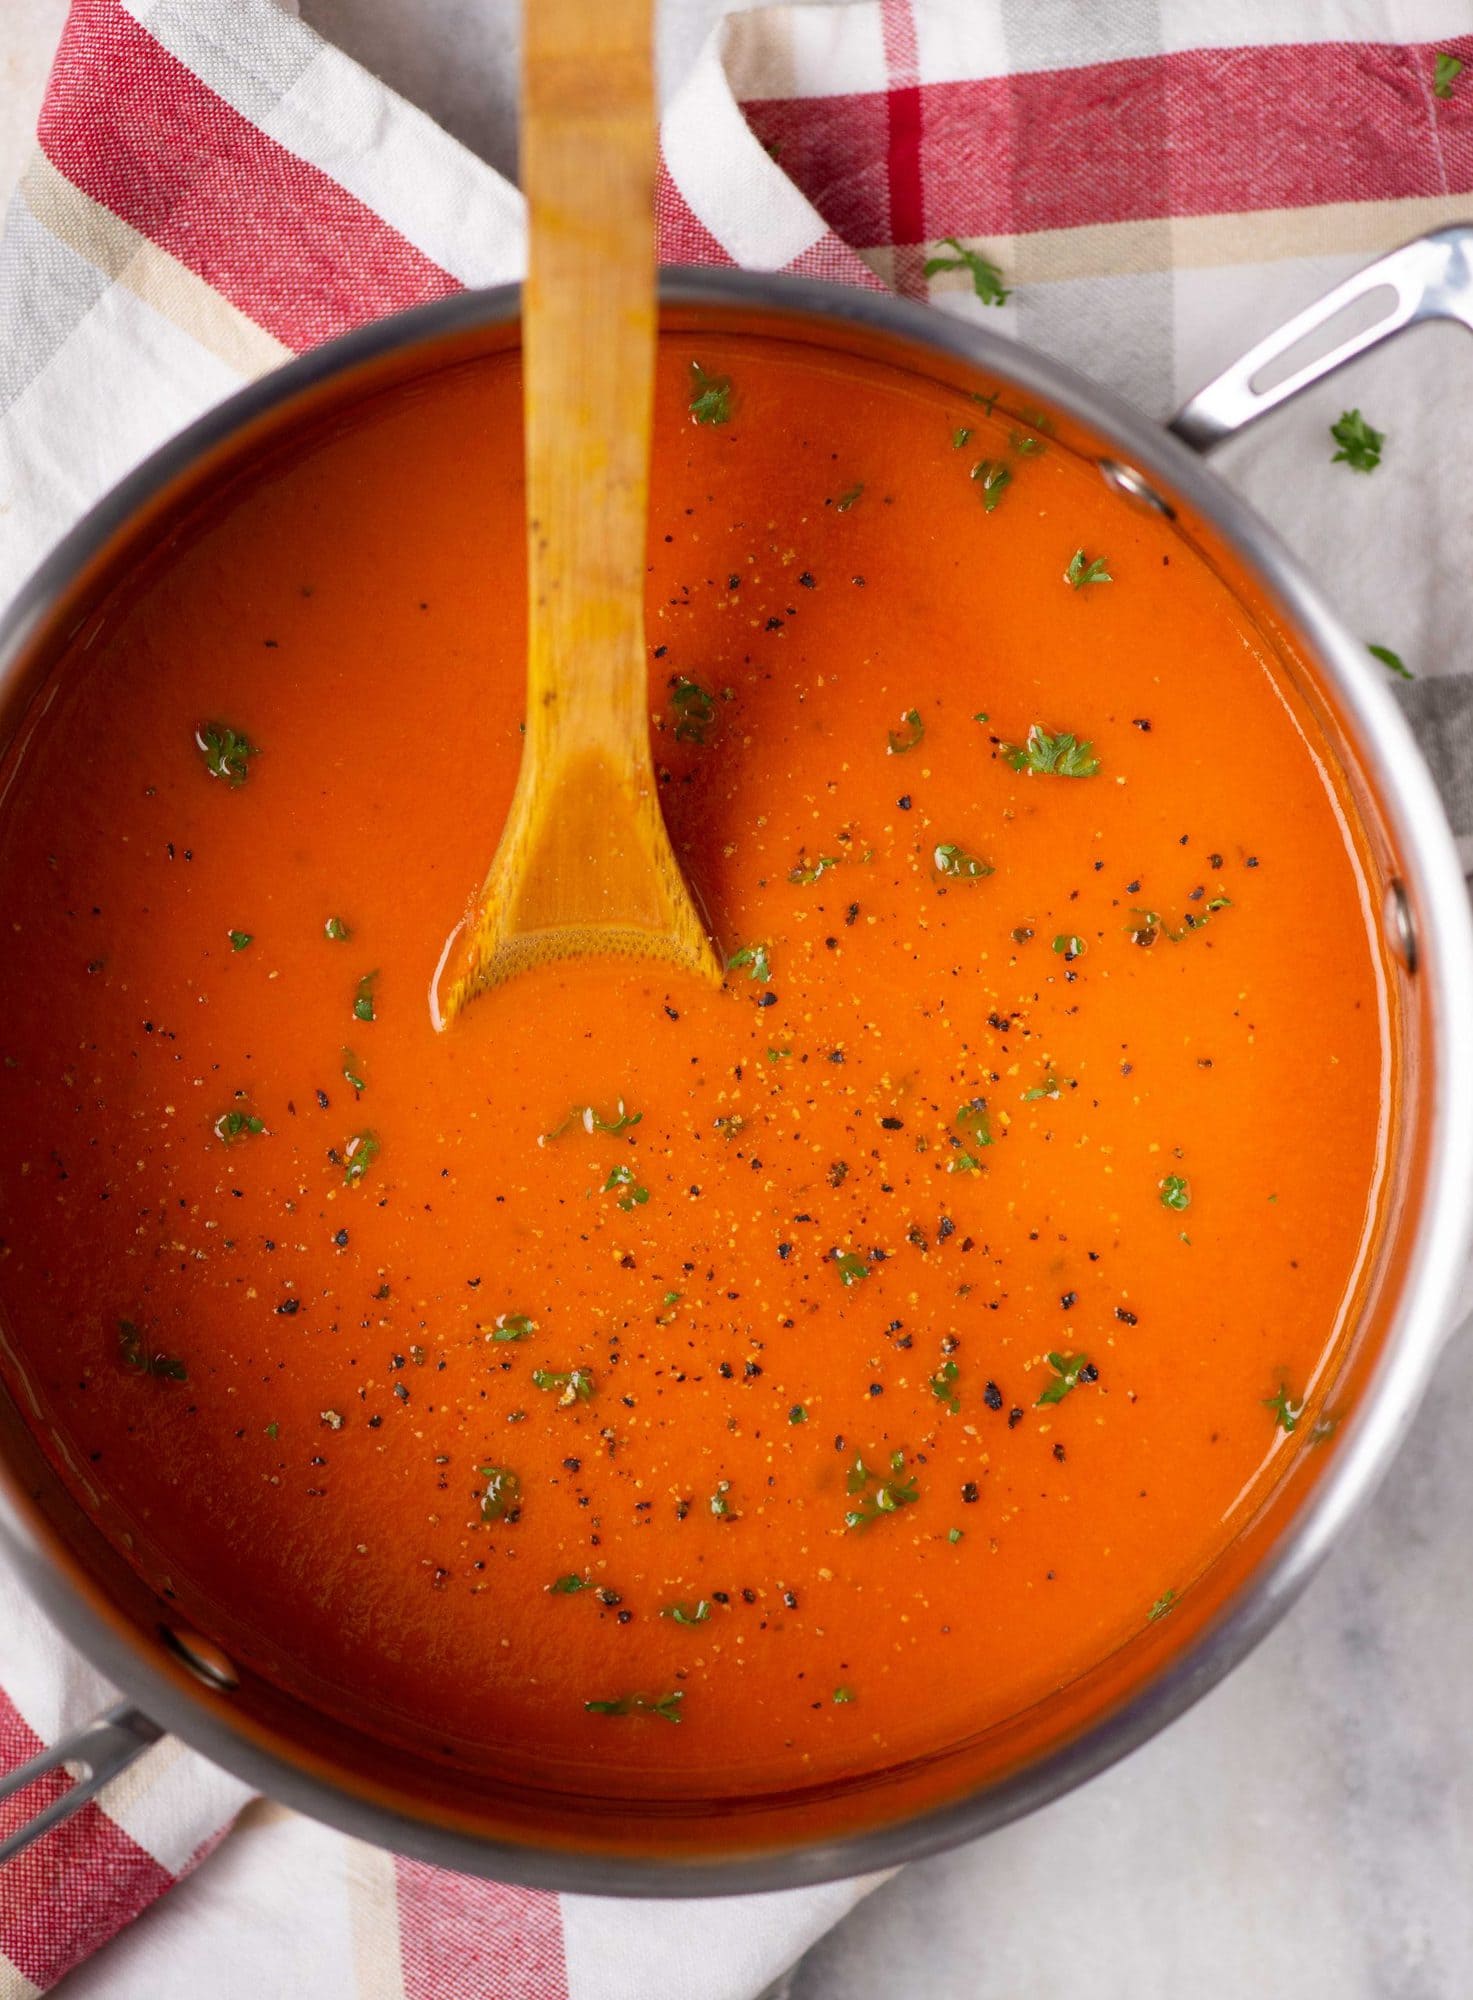 Classic tomato soup is homemade in a soup pot with a chopped basil garnished on top and wooden ladle shown in the image.